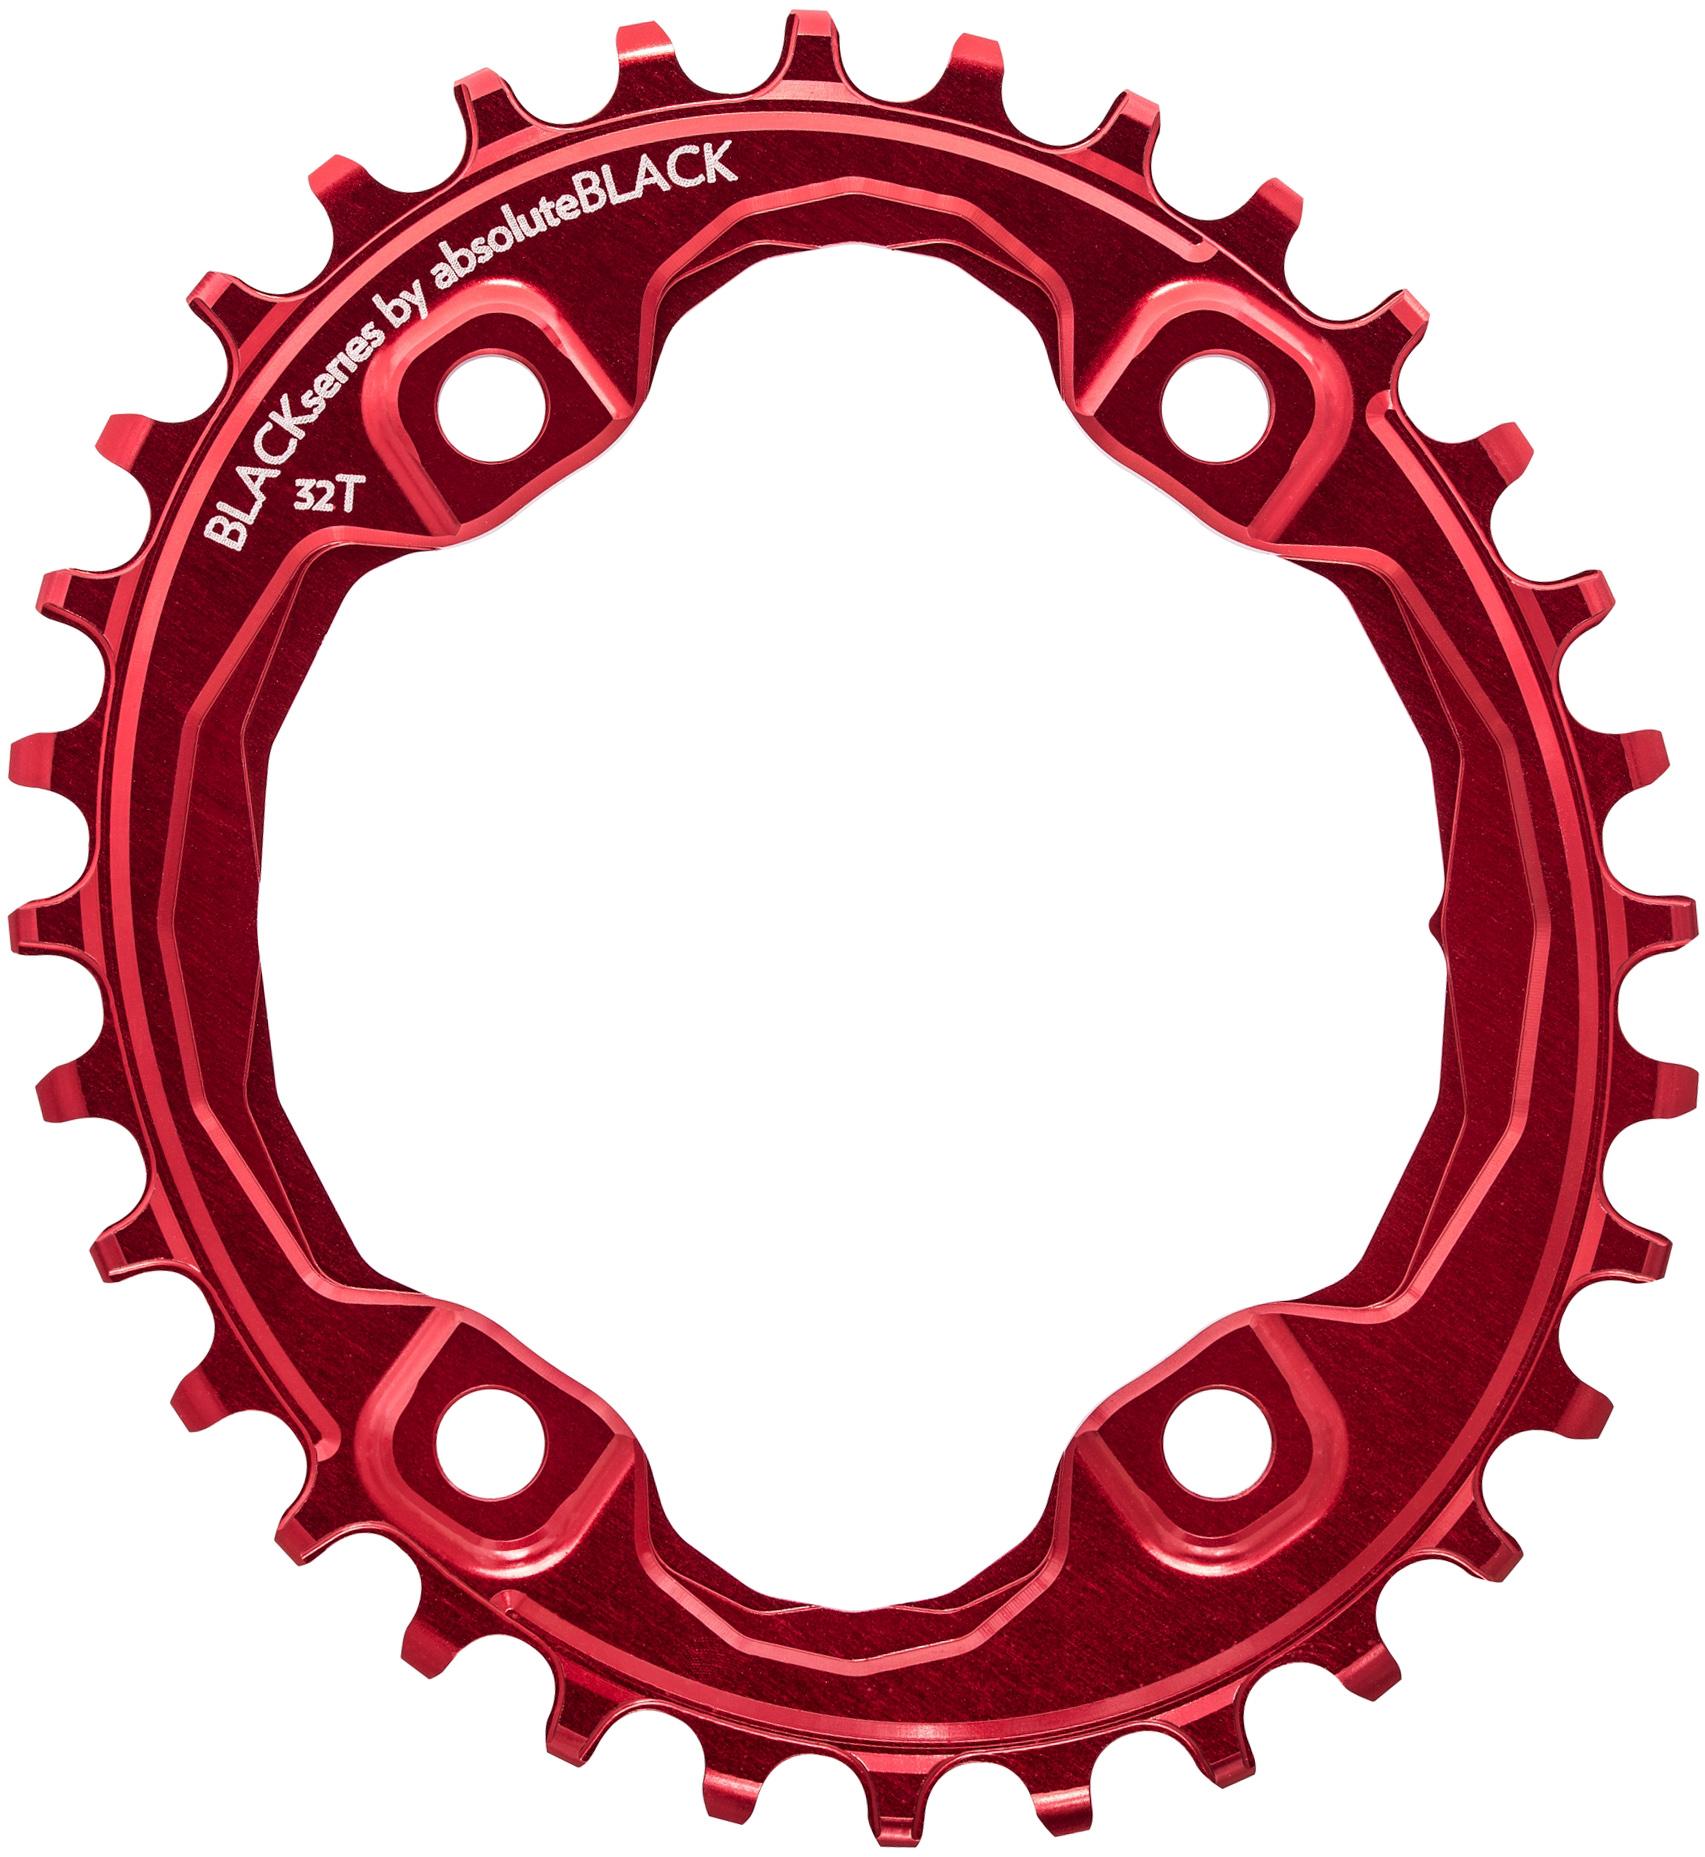 Black By Absolutebla Narrow Wide Oval Xt M8000 Chainring - Red